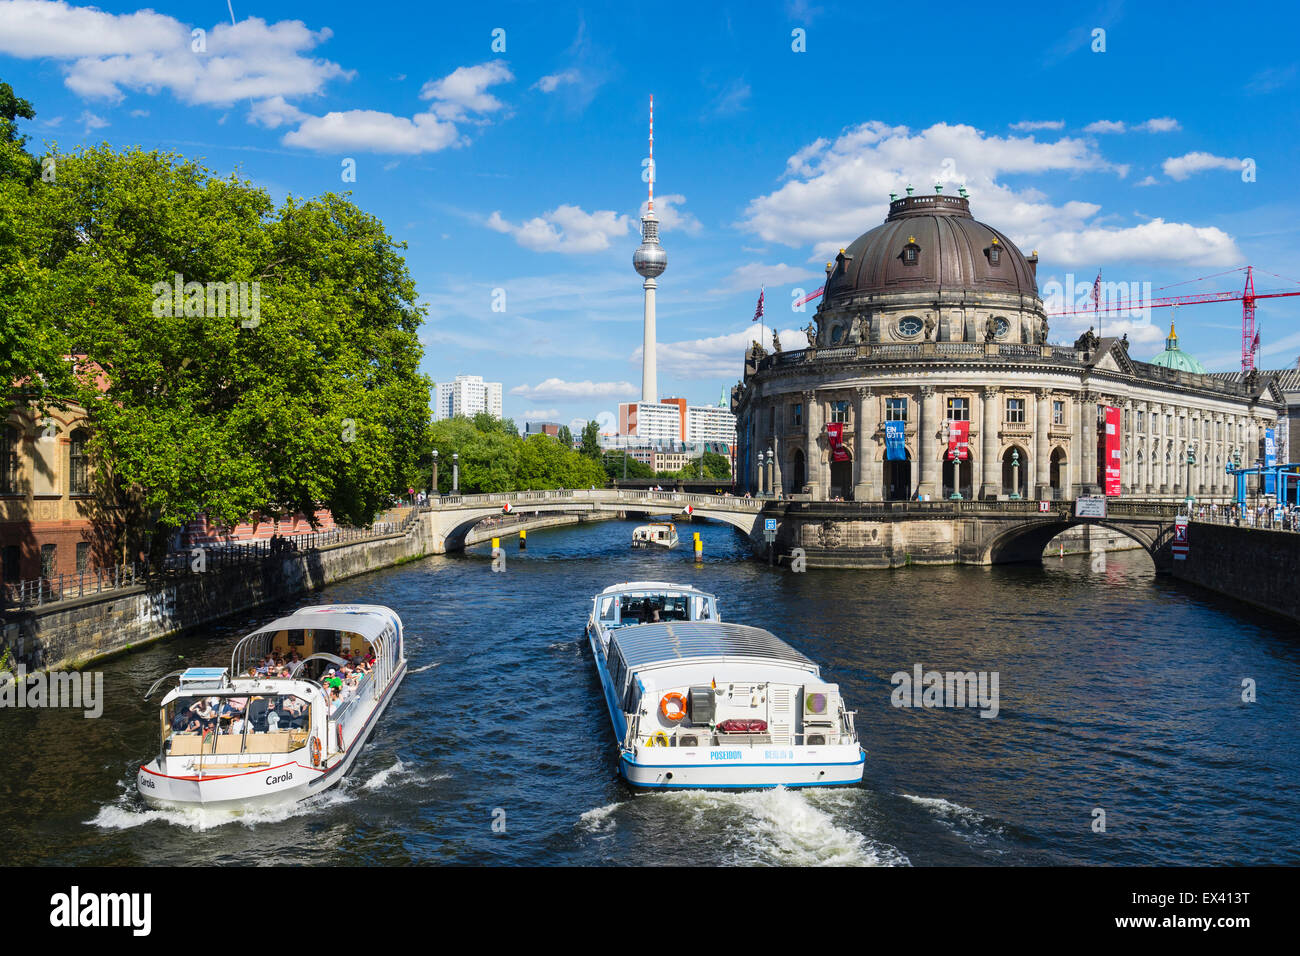 View of Bode Museum and Television Tower or Fernsehturm in Berlin Germany Stock Photo